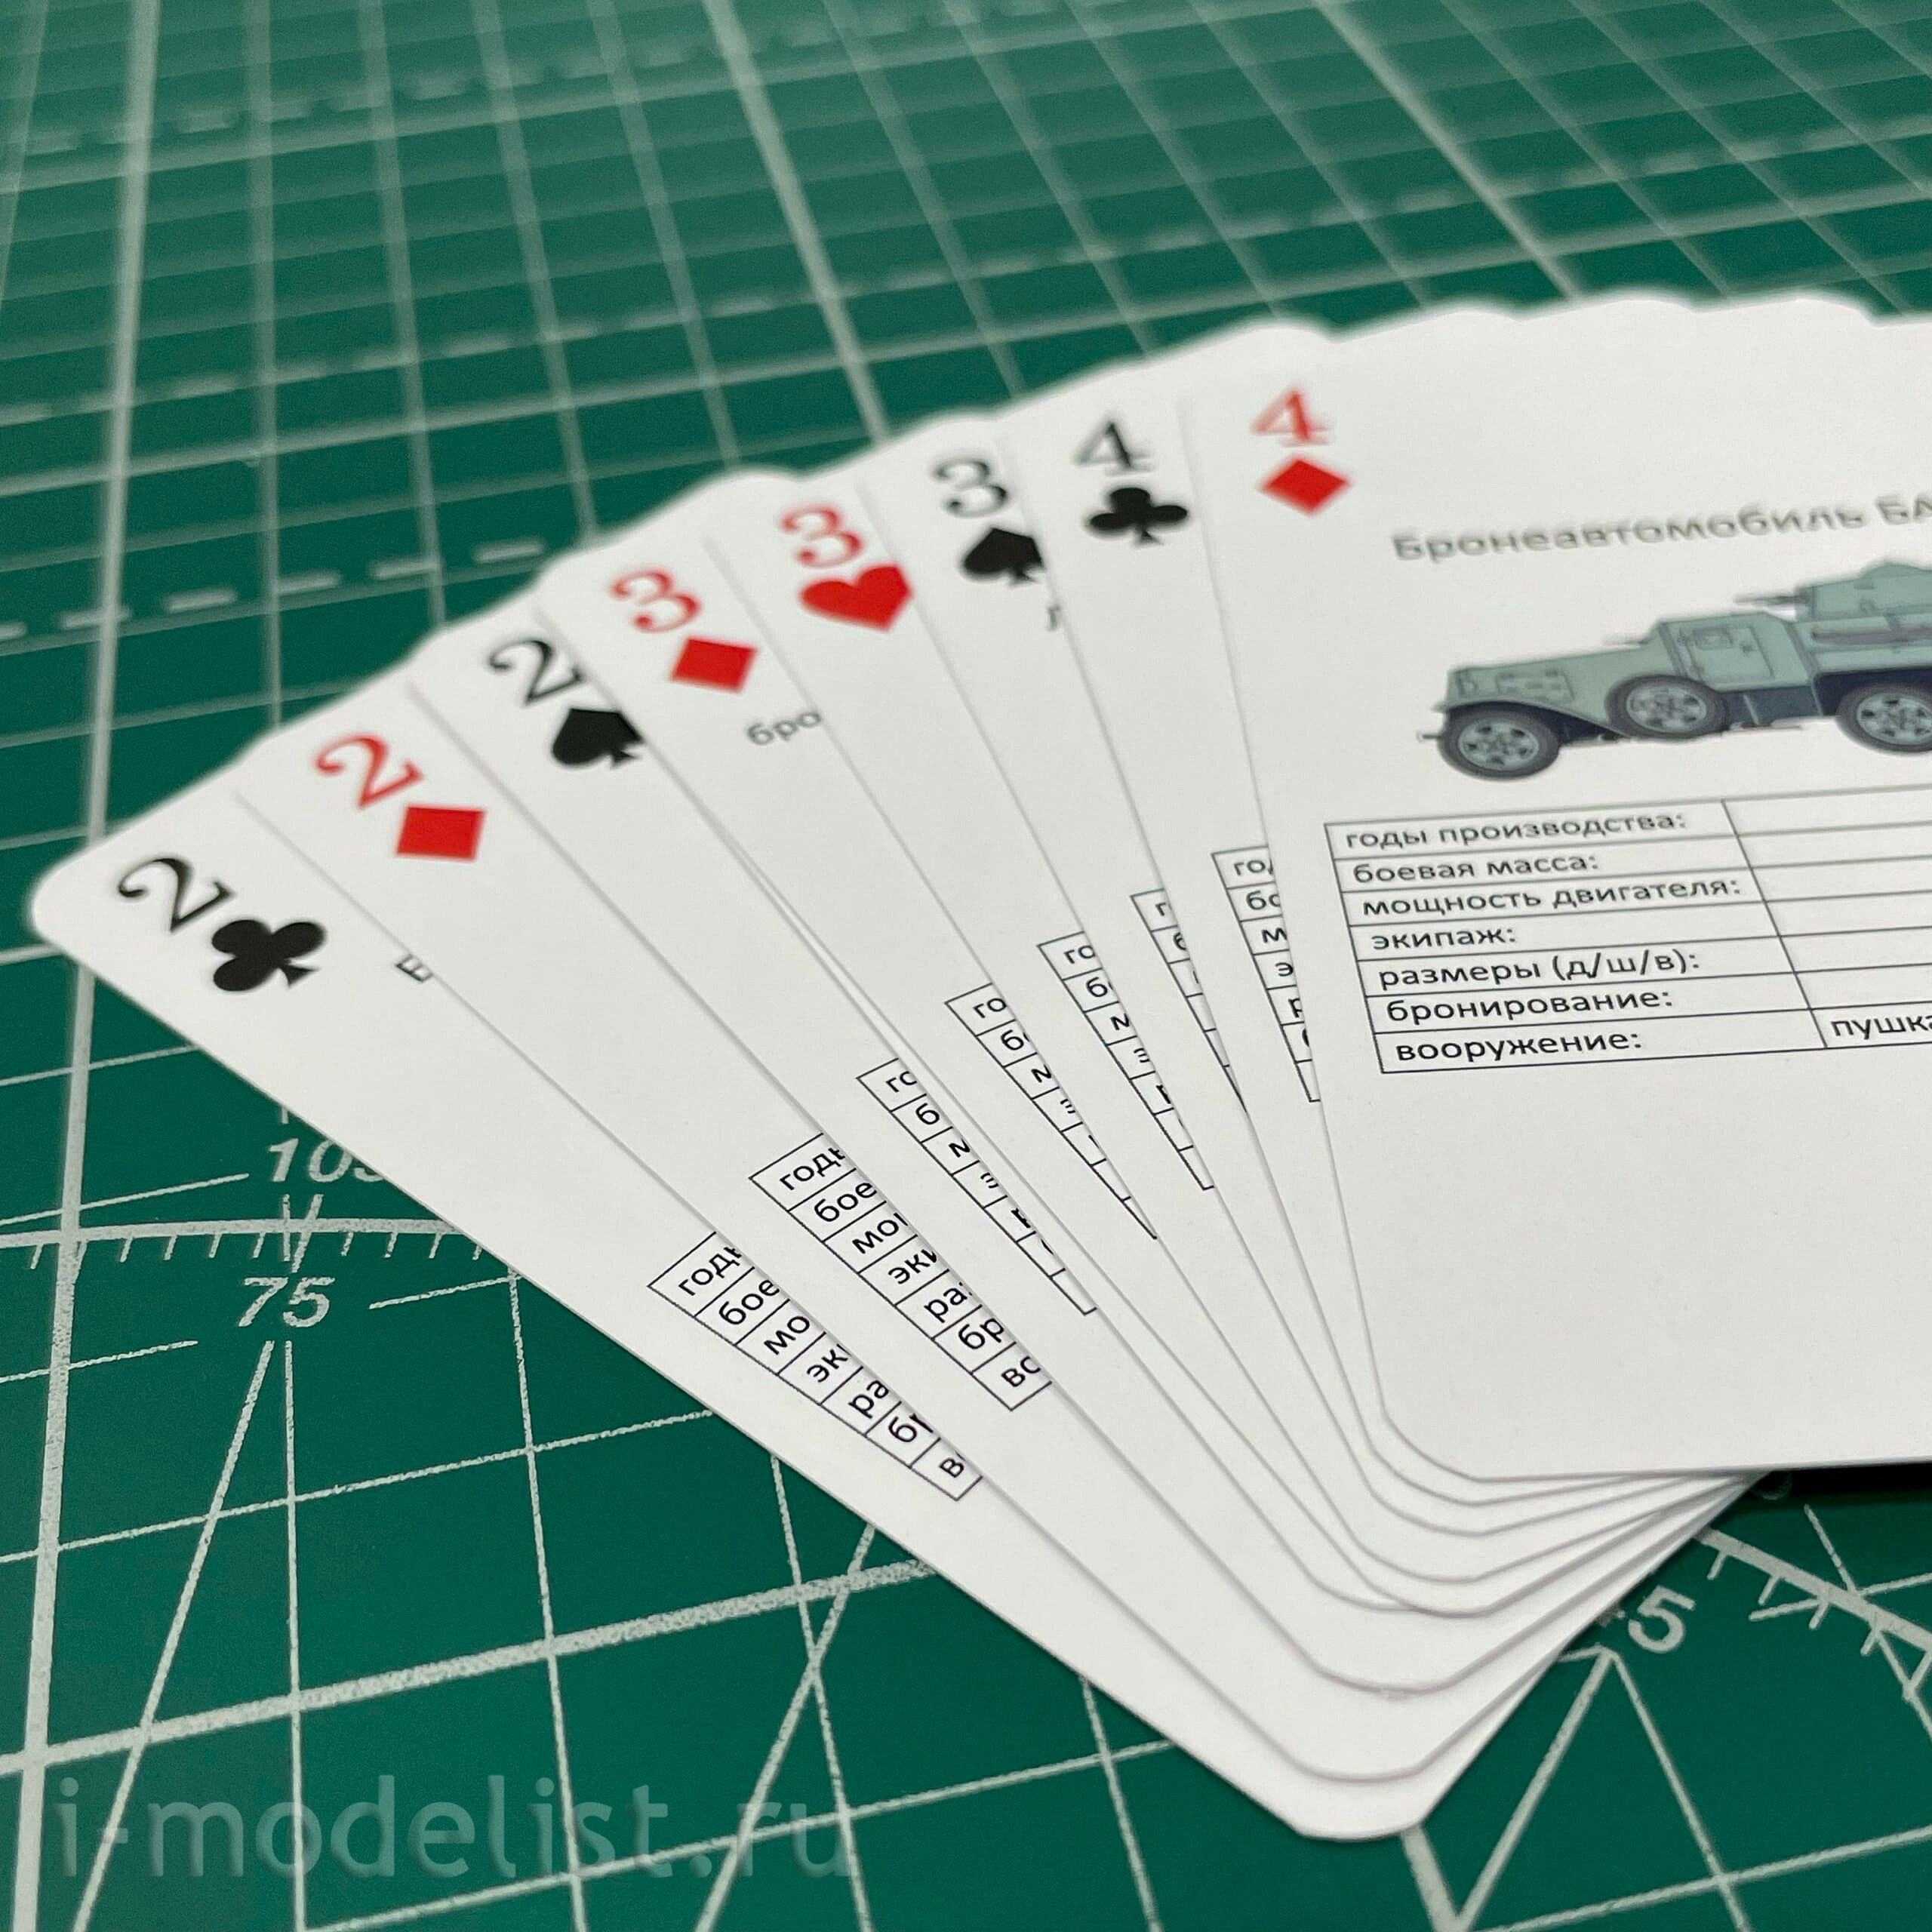 K02 is a unique deck of playing cards with armored vehicles of the USSR of the 2nd century period, option 2